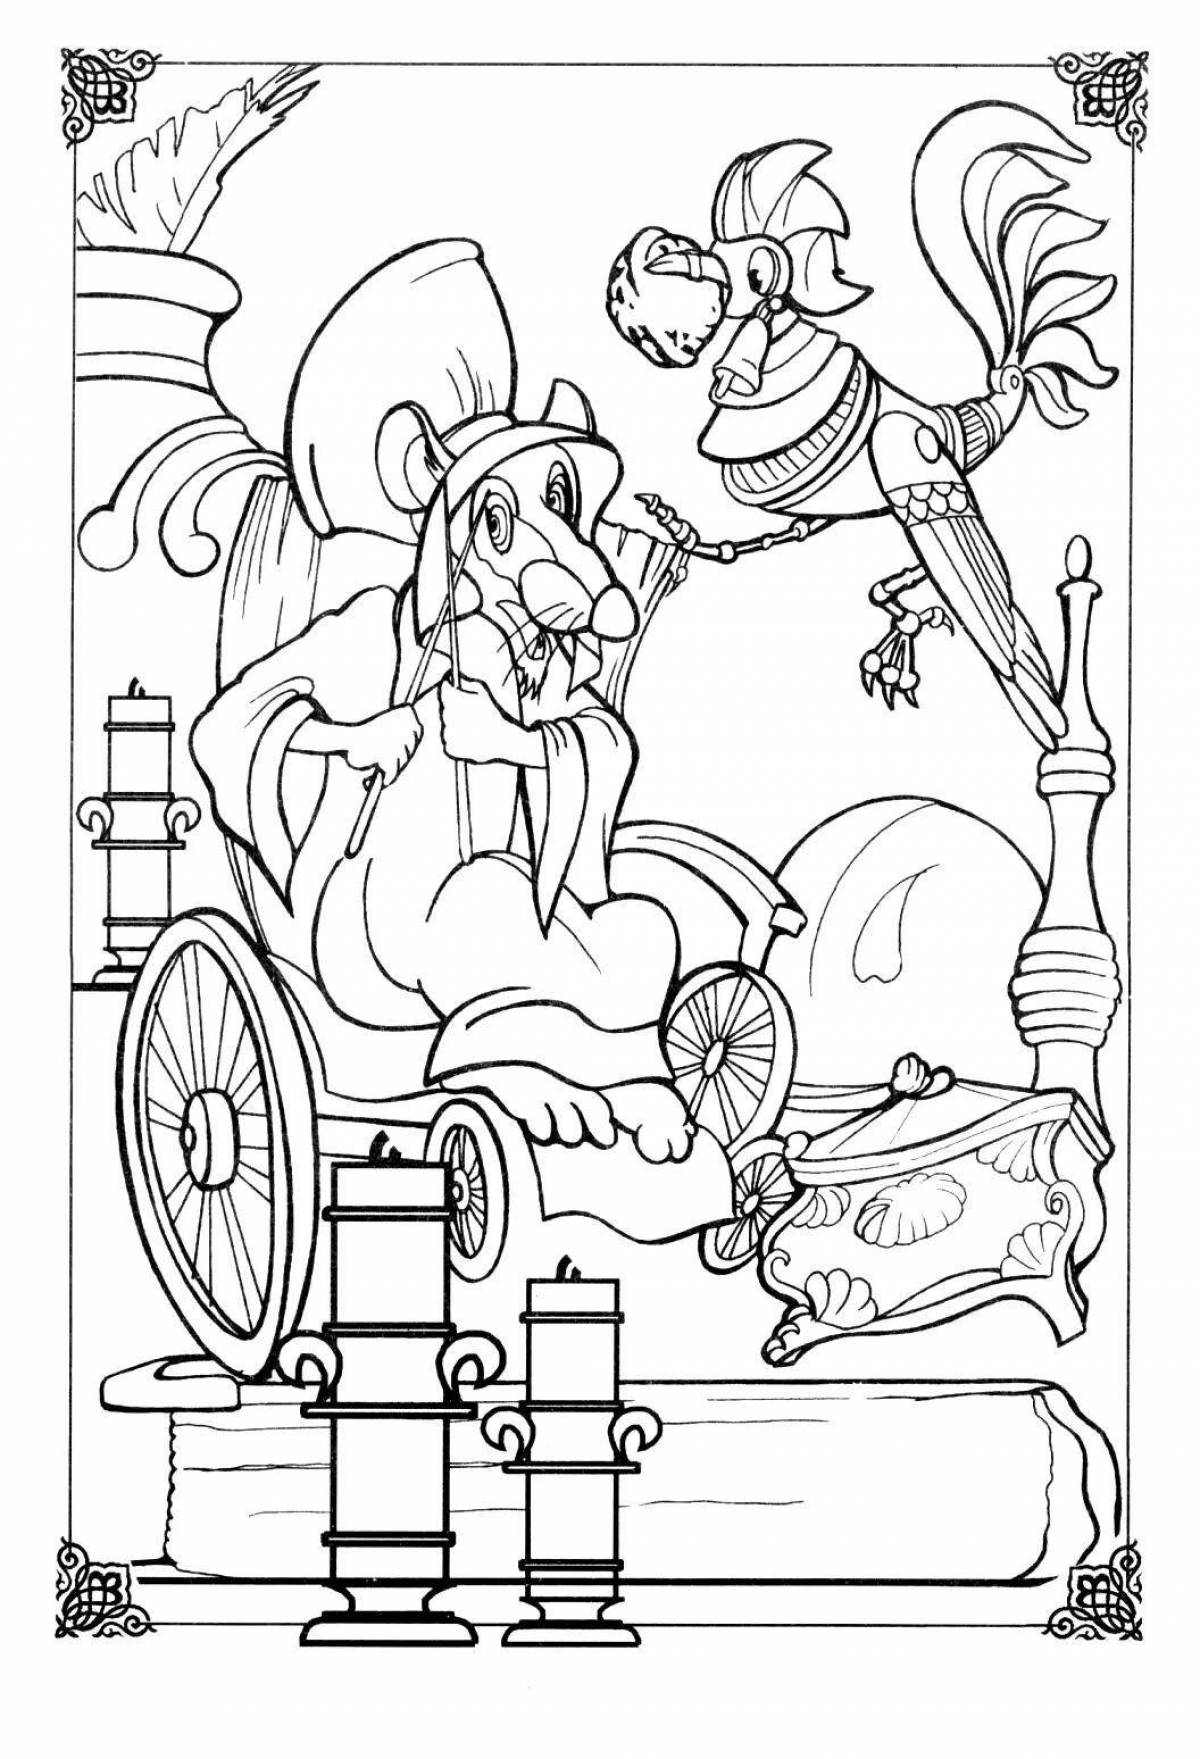 Coloring book shining nutcracker and mouse king